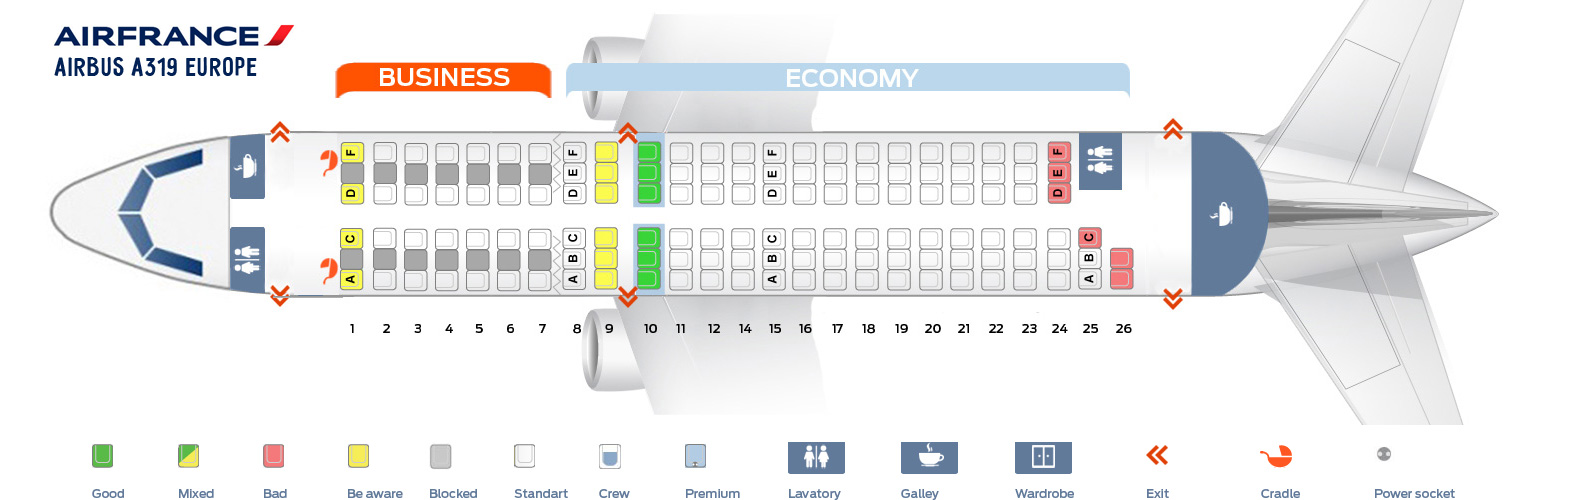 Seat Map Airbus A319 Europe Air France